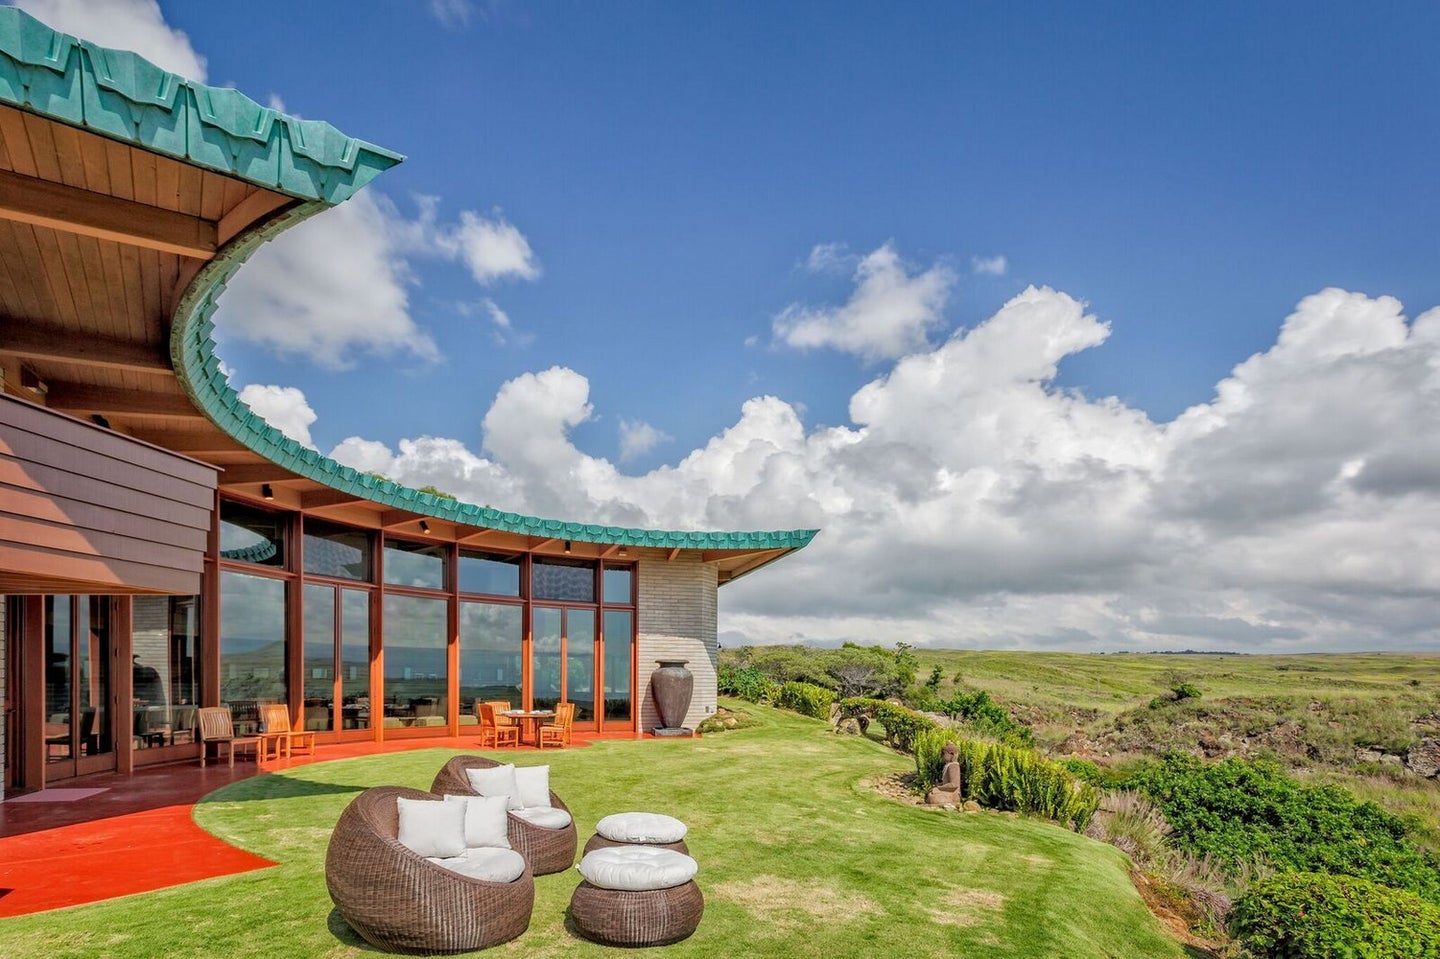 Here’s Your Chance To Rent A Home Designed By Frank Lloyd Wright